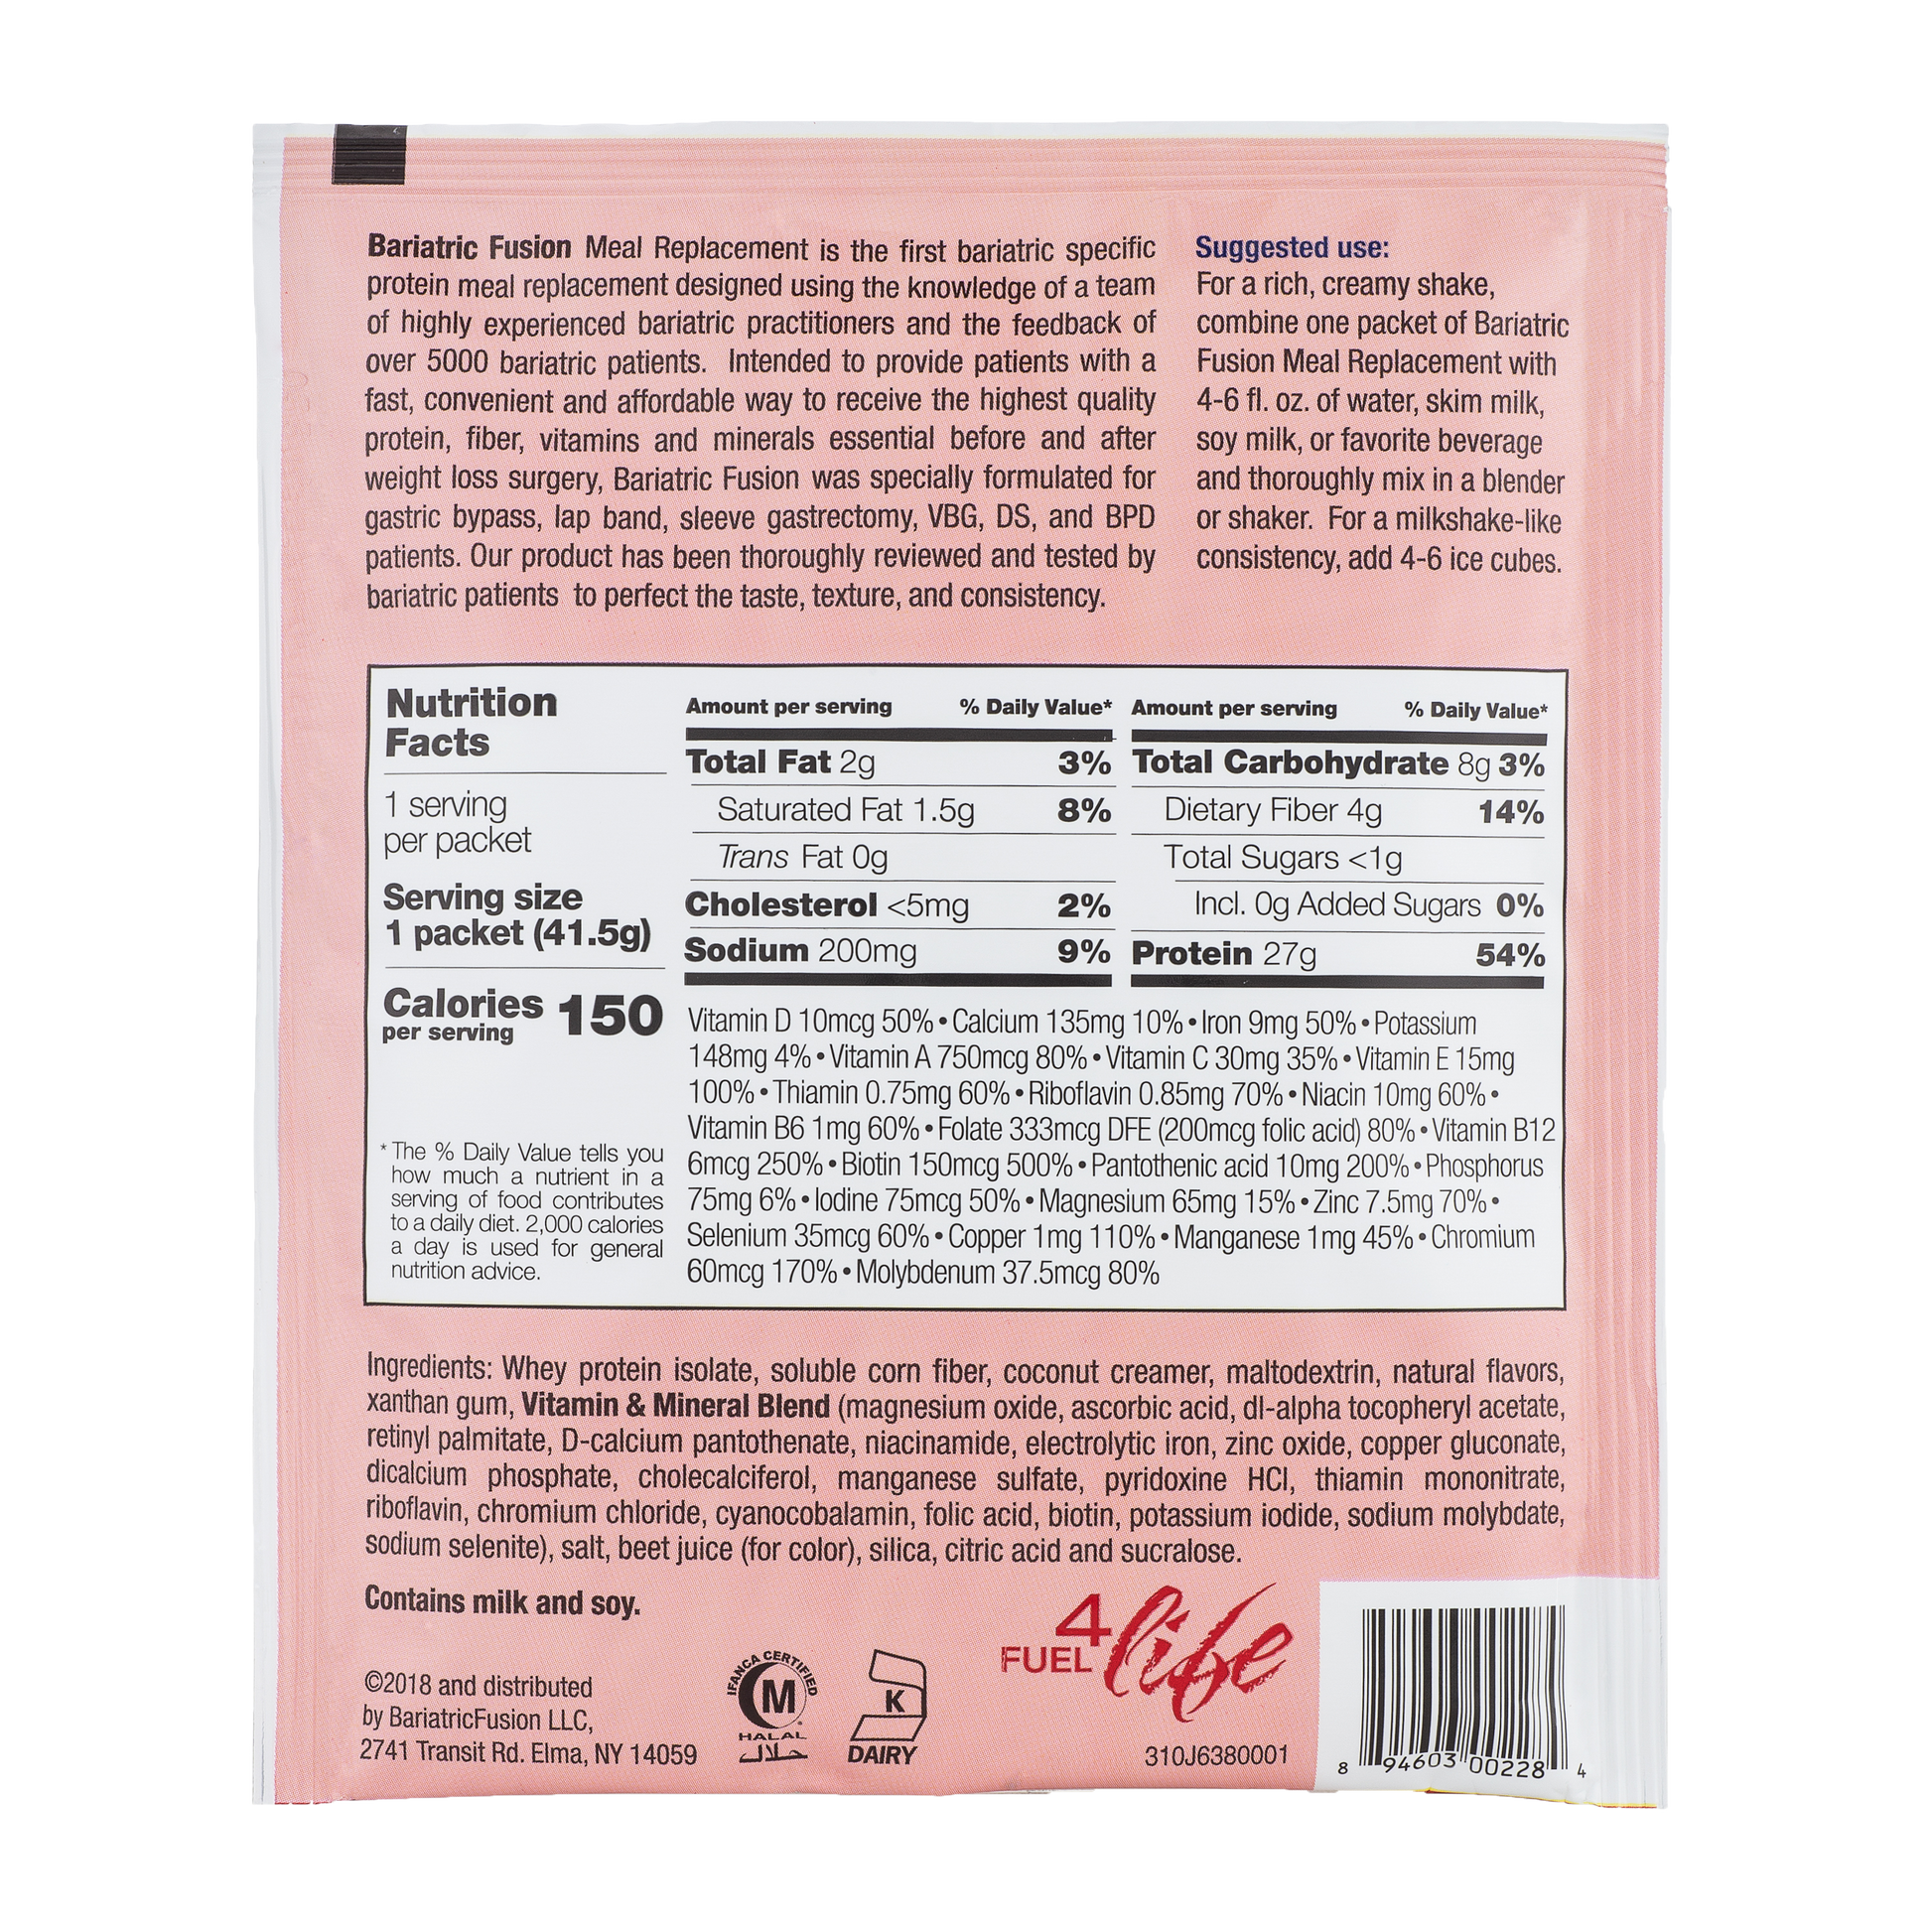 Strawberry High Protein Meal Replacement - Single Serve Packet - Bariatric Fusion